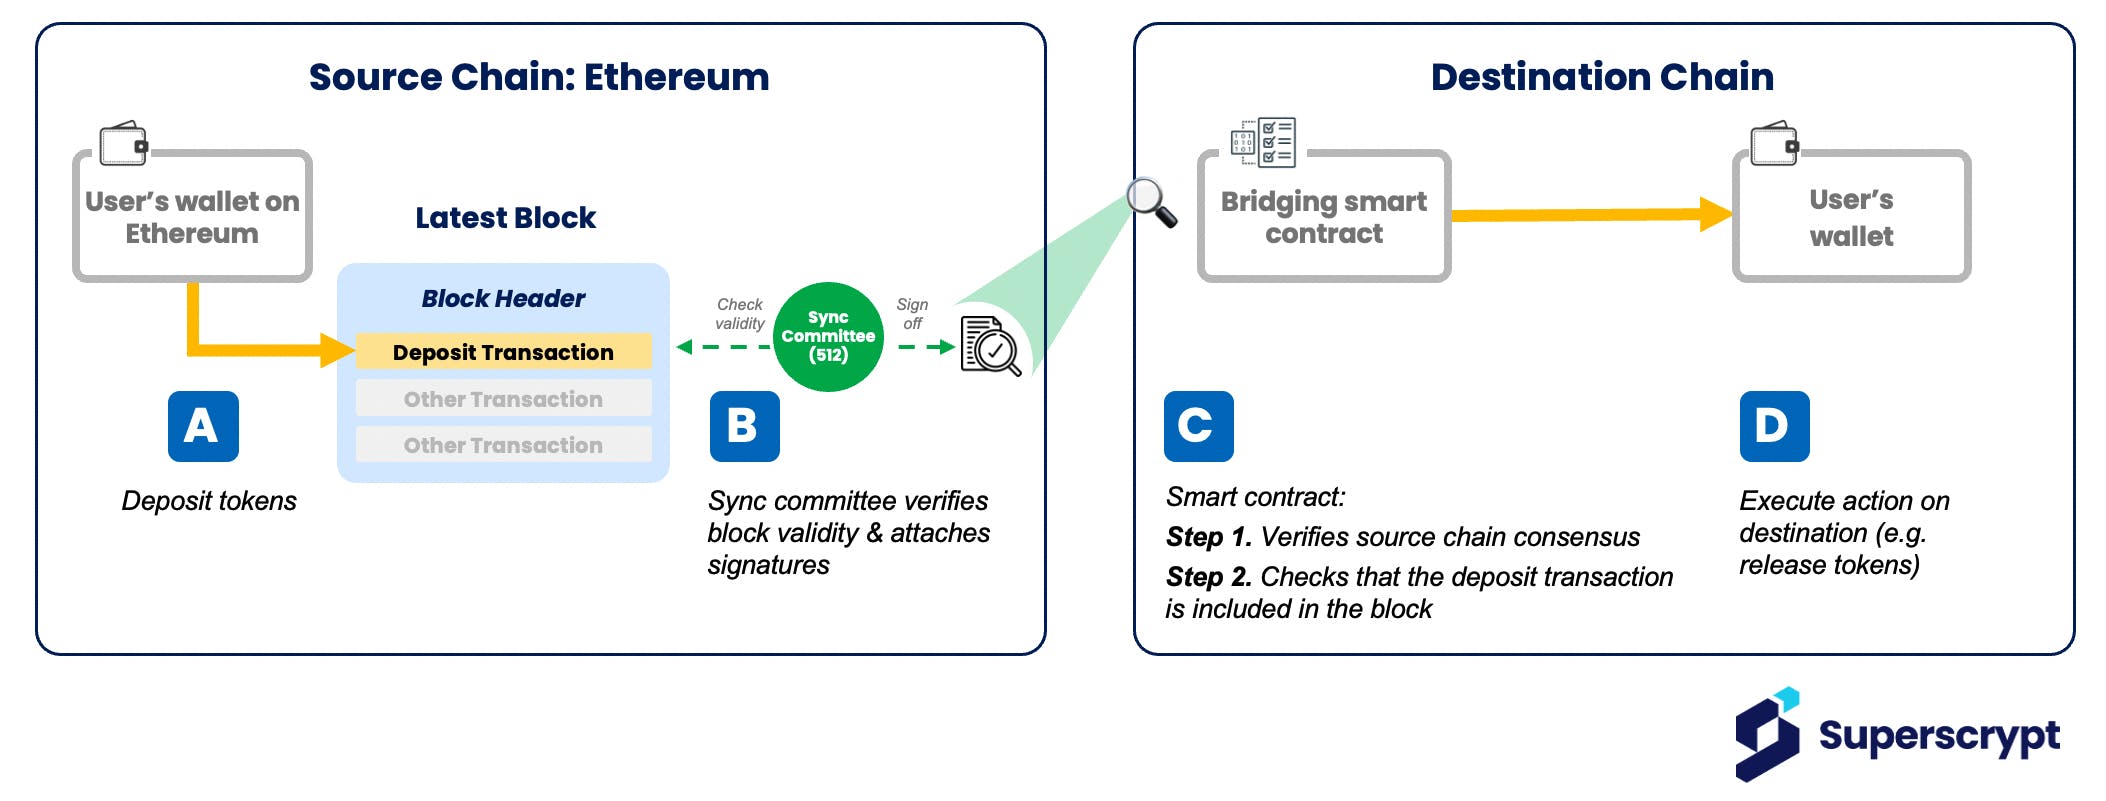 Verifying source chain consensus (on Ethereum) via sync committee